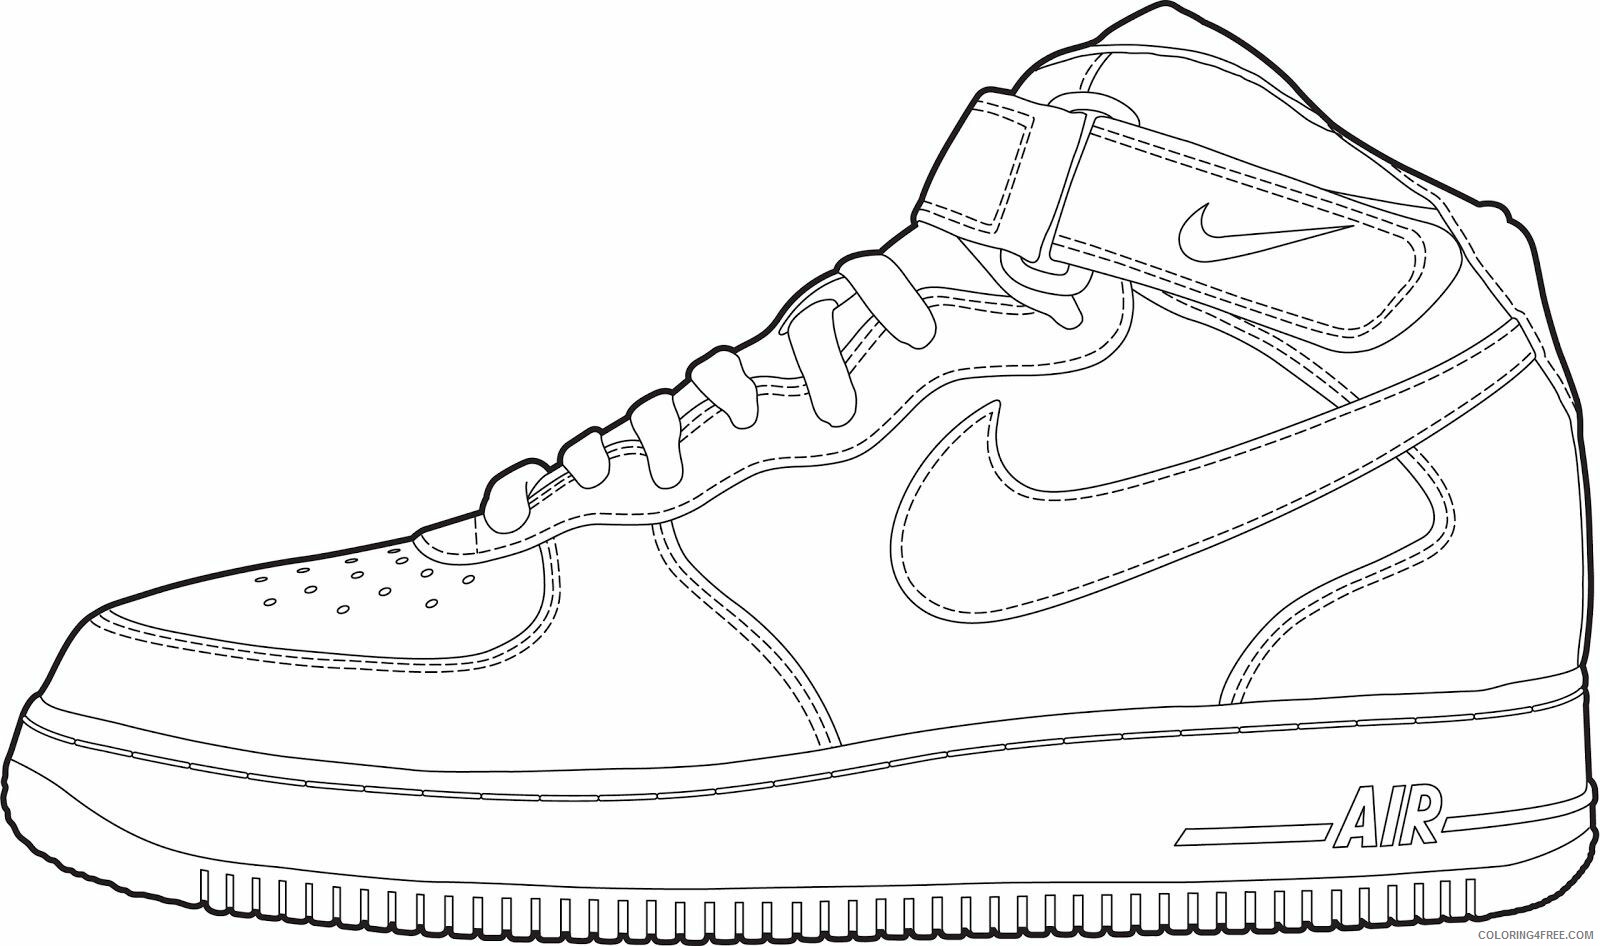 Air Nike Air Coloring Pages Printable Sheets Air Force One Sheet 2021 a 2878 Coloring4free